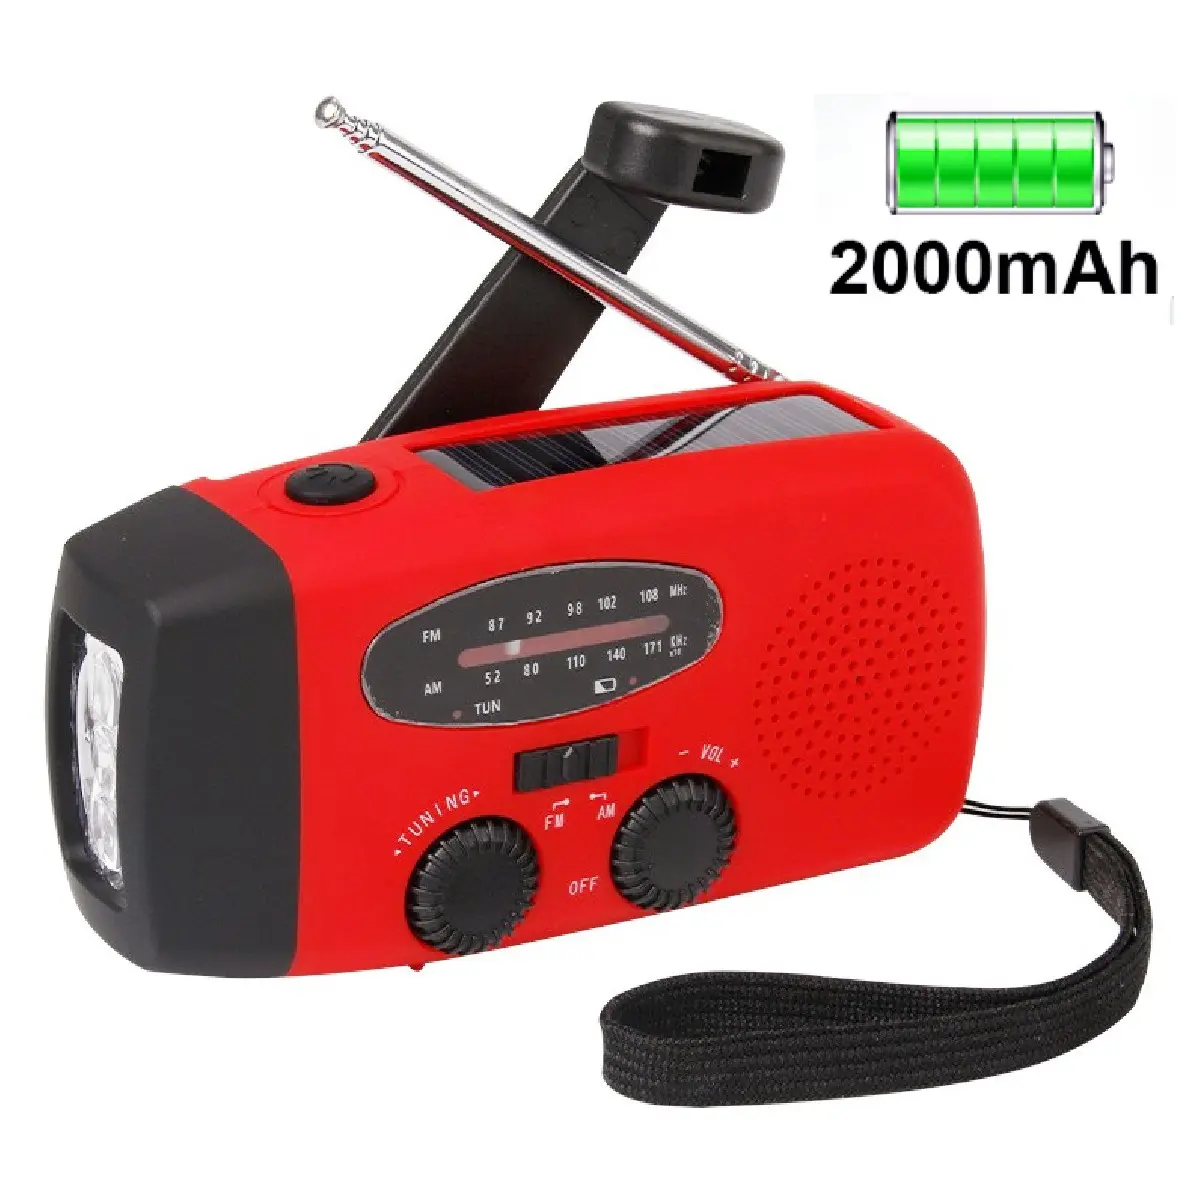 Emergency Hand Crank Radio with LED Flashlight AM/FM Portable Weather Radio with 2000mAh USB Charged   Solar Power for Camping